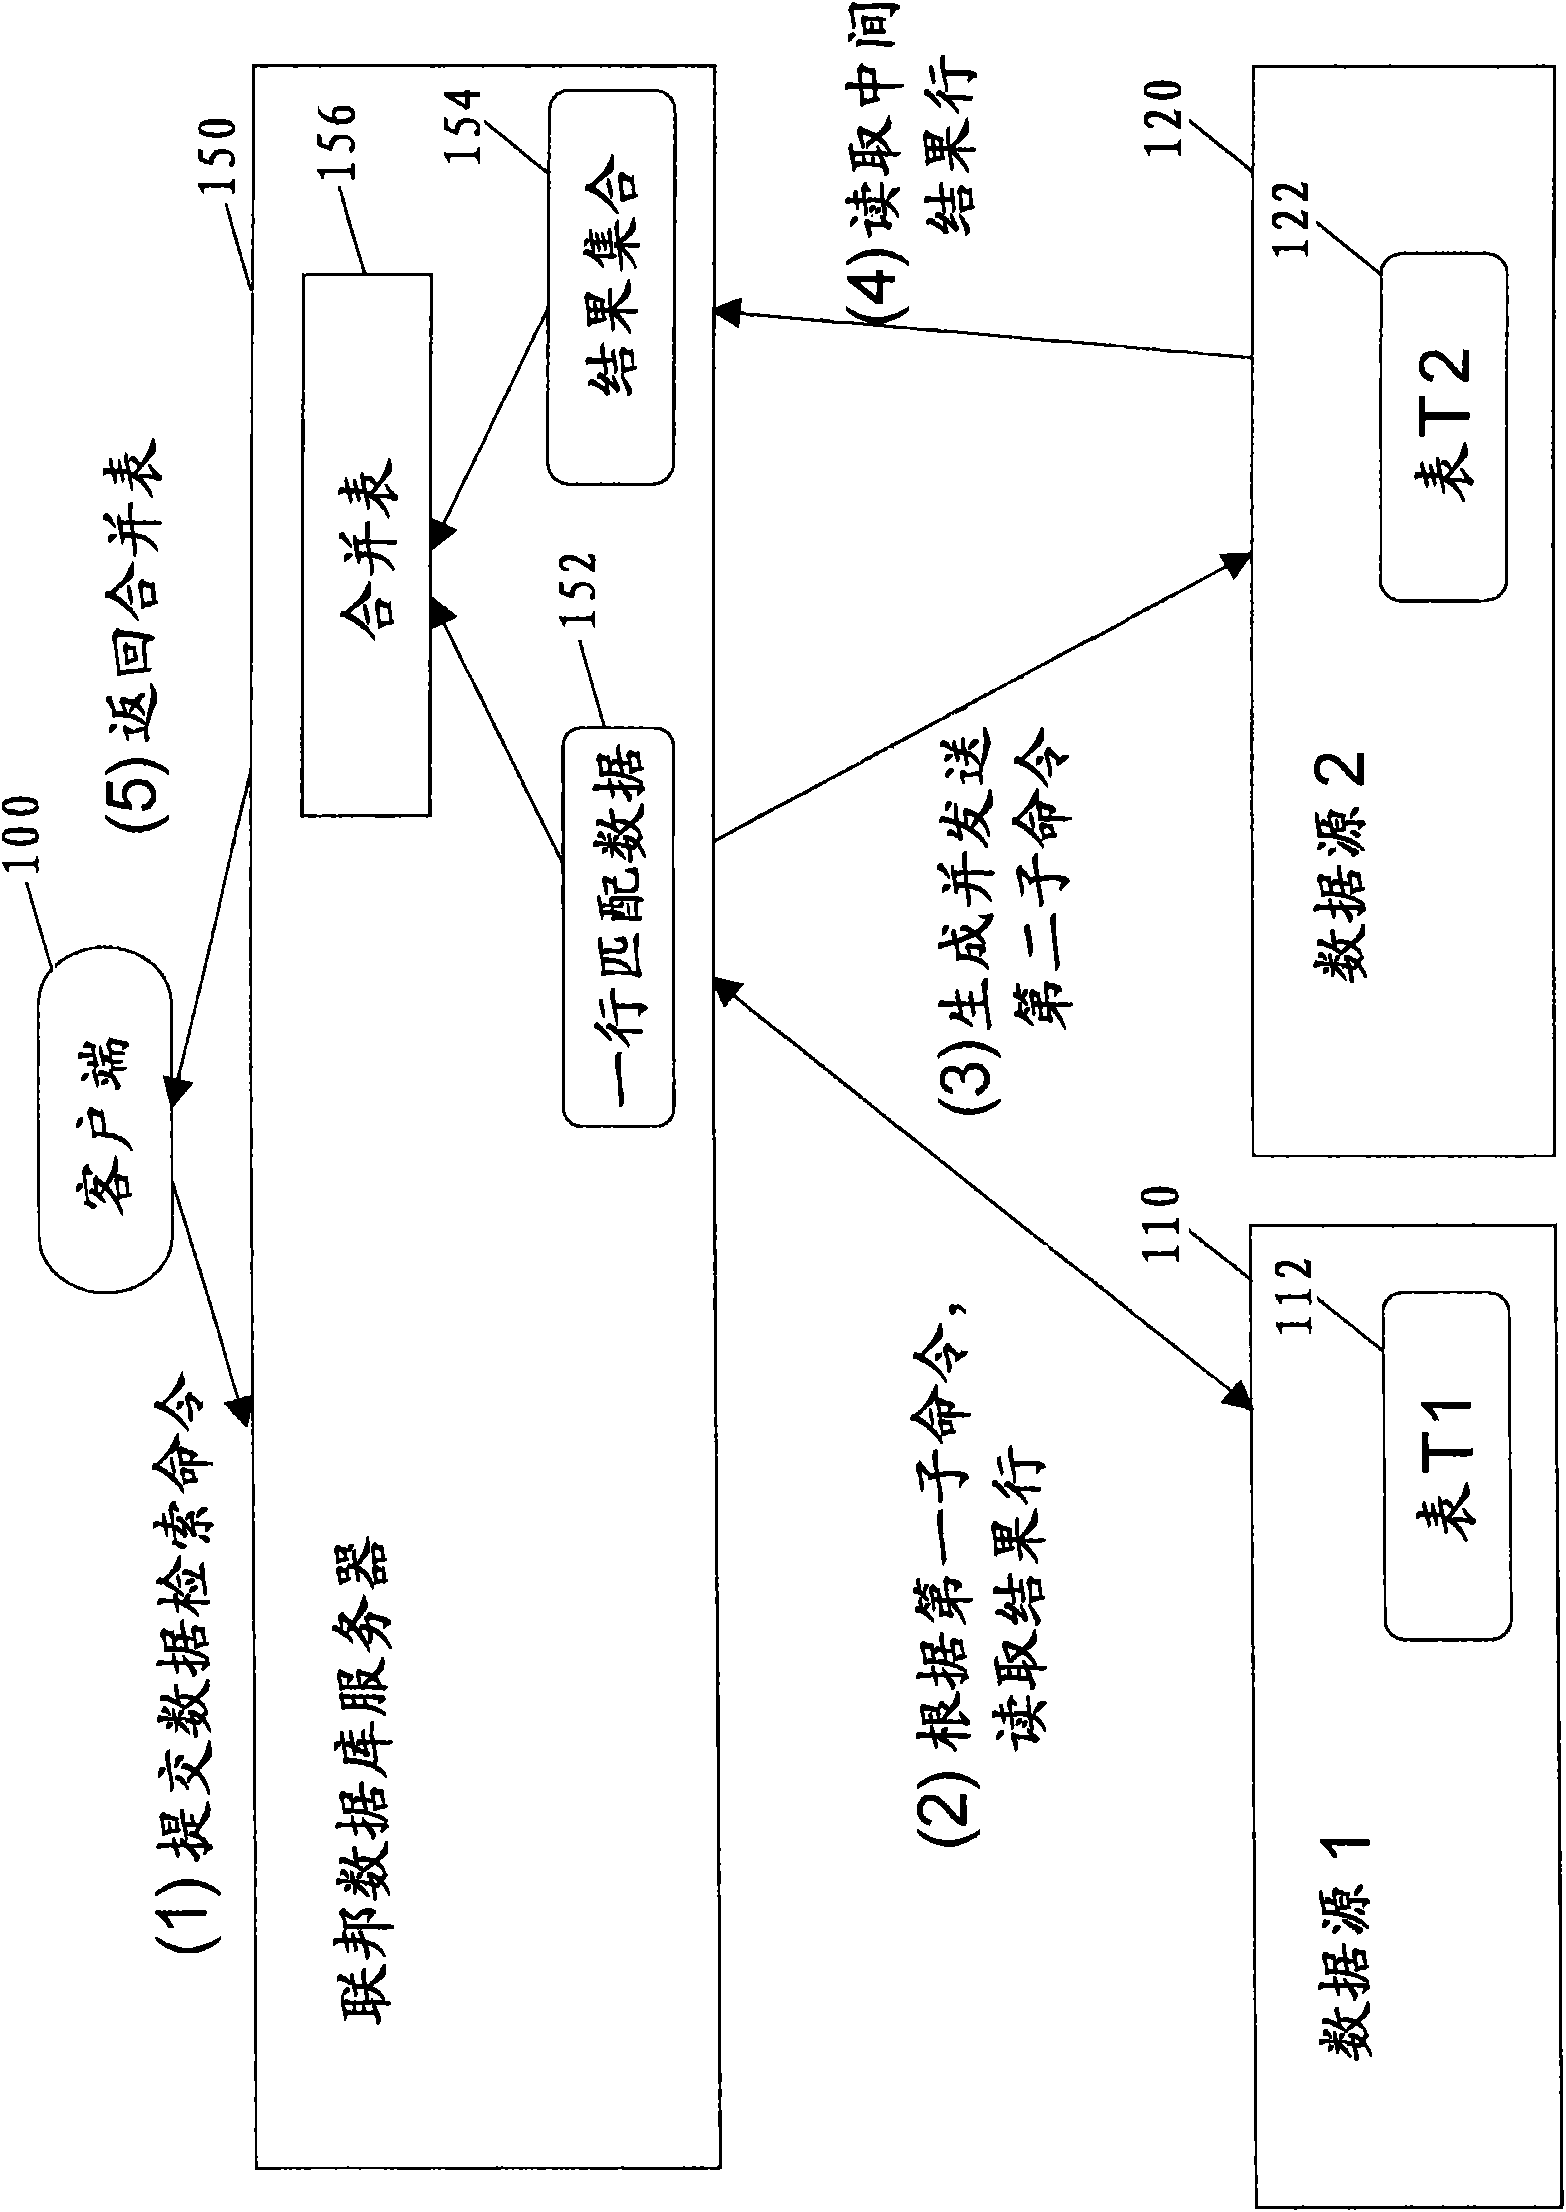 Method and system for connecting tables in a plurality of heterogeneous distributed databases